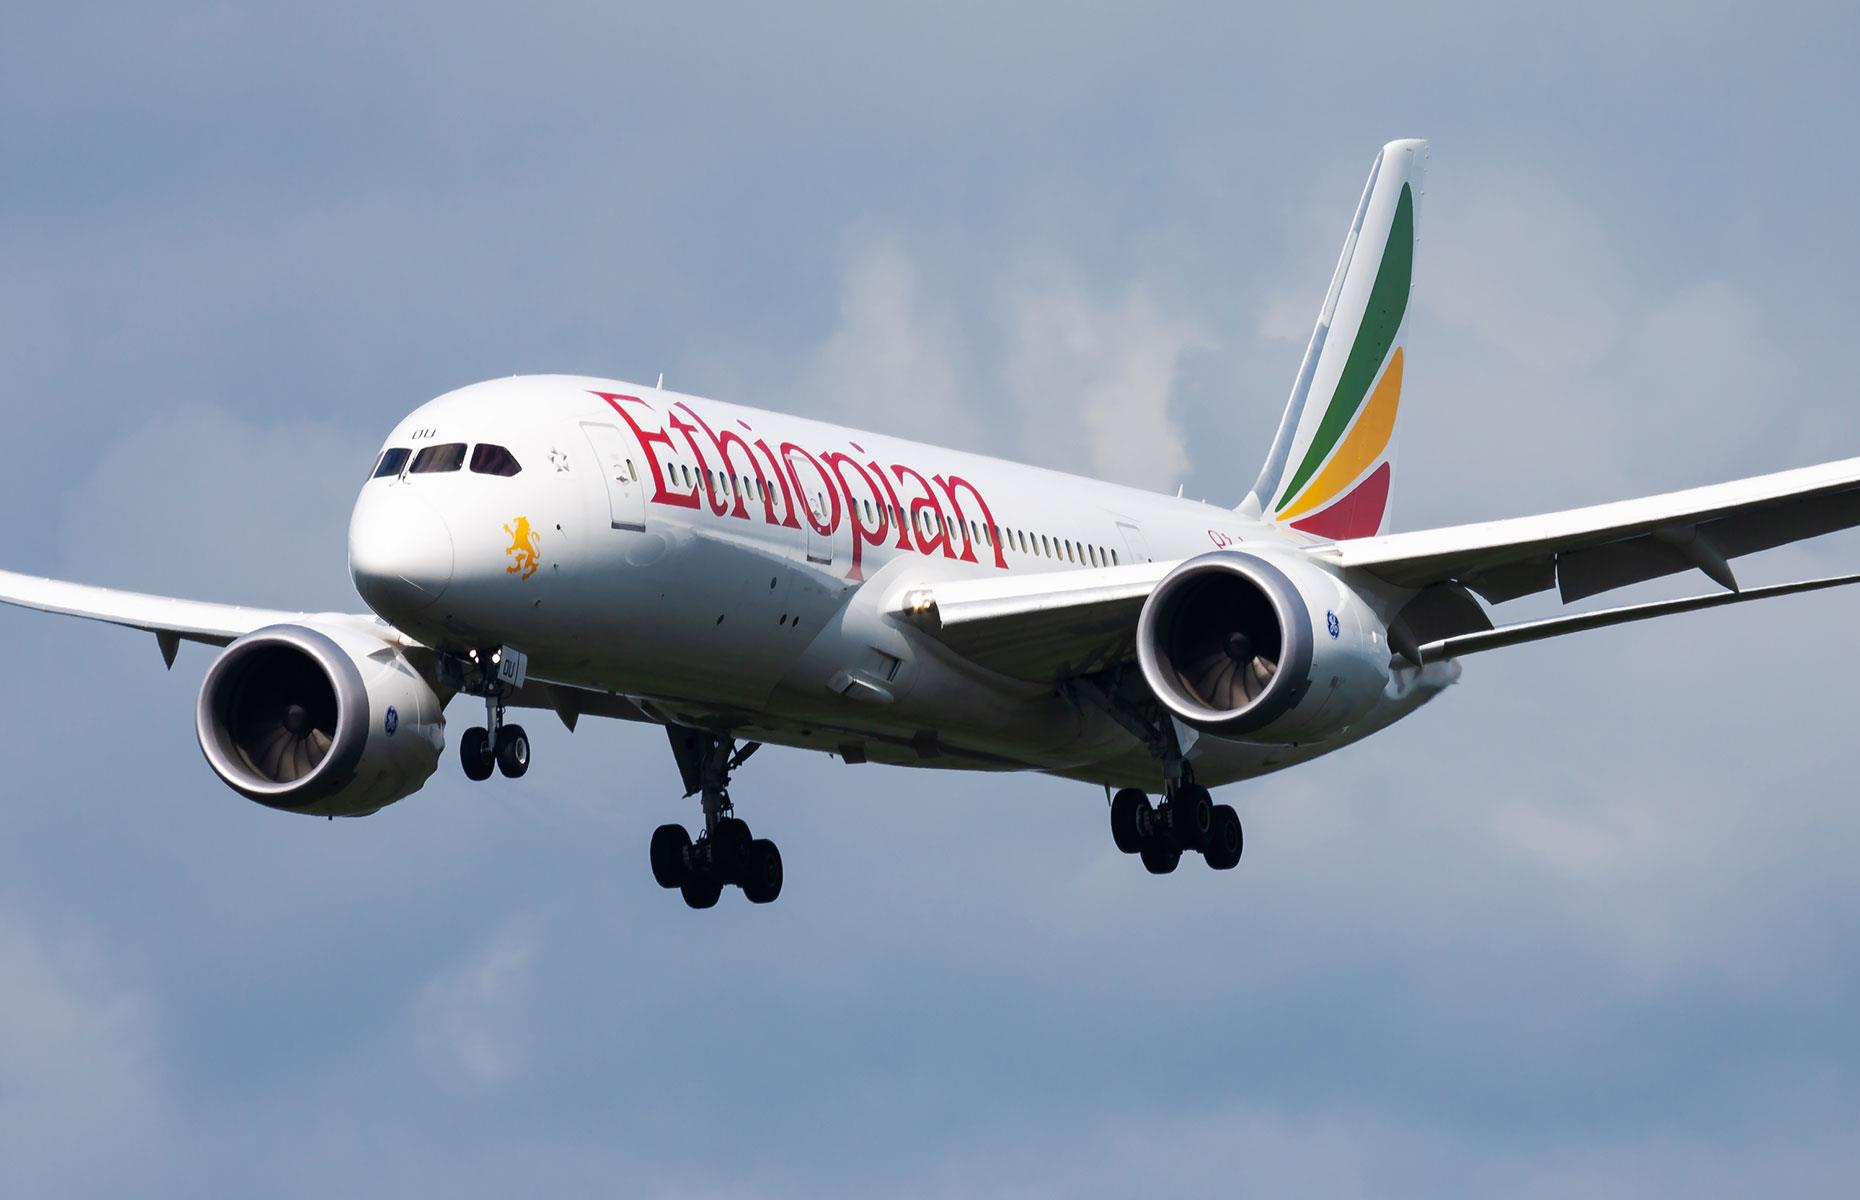 <p>Not only did Ethiopian Airlines rank in the top 40% of Skytrax's list of the best 100 airlines in the world in 2023, but it was also crowned the Best Airline in Africa once again after winning the category for five previous years. The flag carrier of Ethiopia was founded in 1945 and today serves 19 domestic and 114 international destinations. The airline has the youngest and newest fleet across the entire continent, consisting of Boeing's Dreamliners and Triple Sevens as well as Airbus A350s.</p>